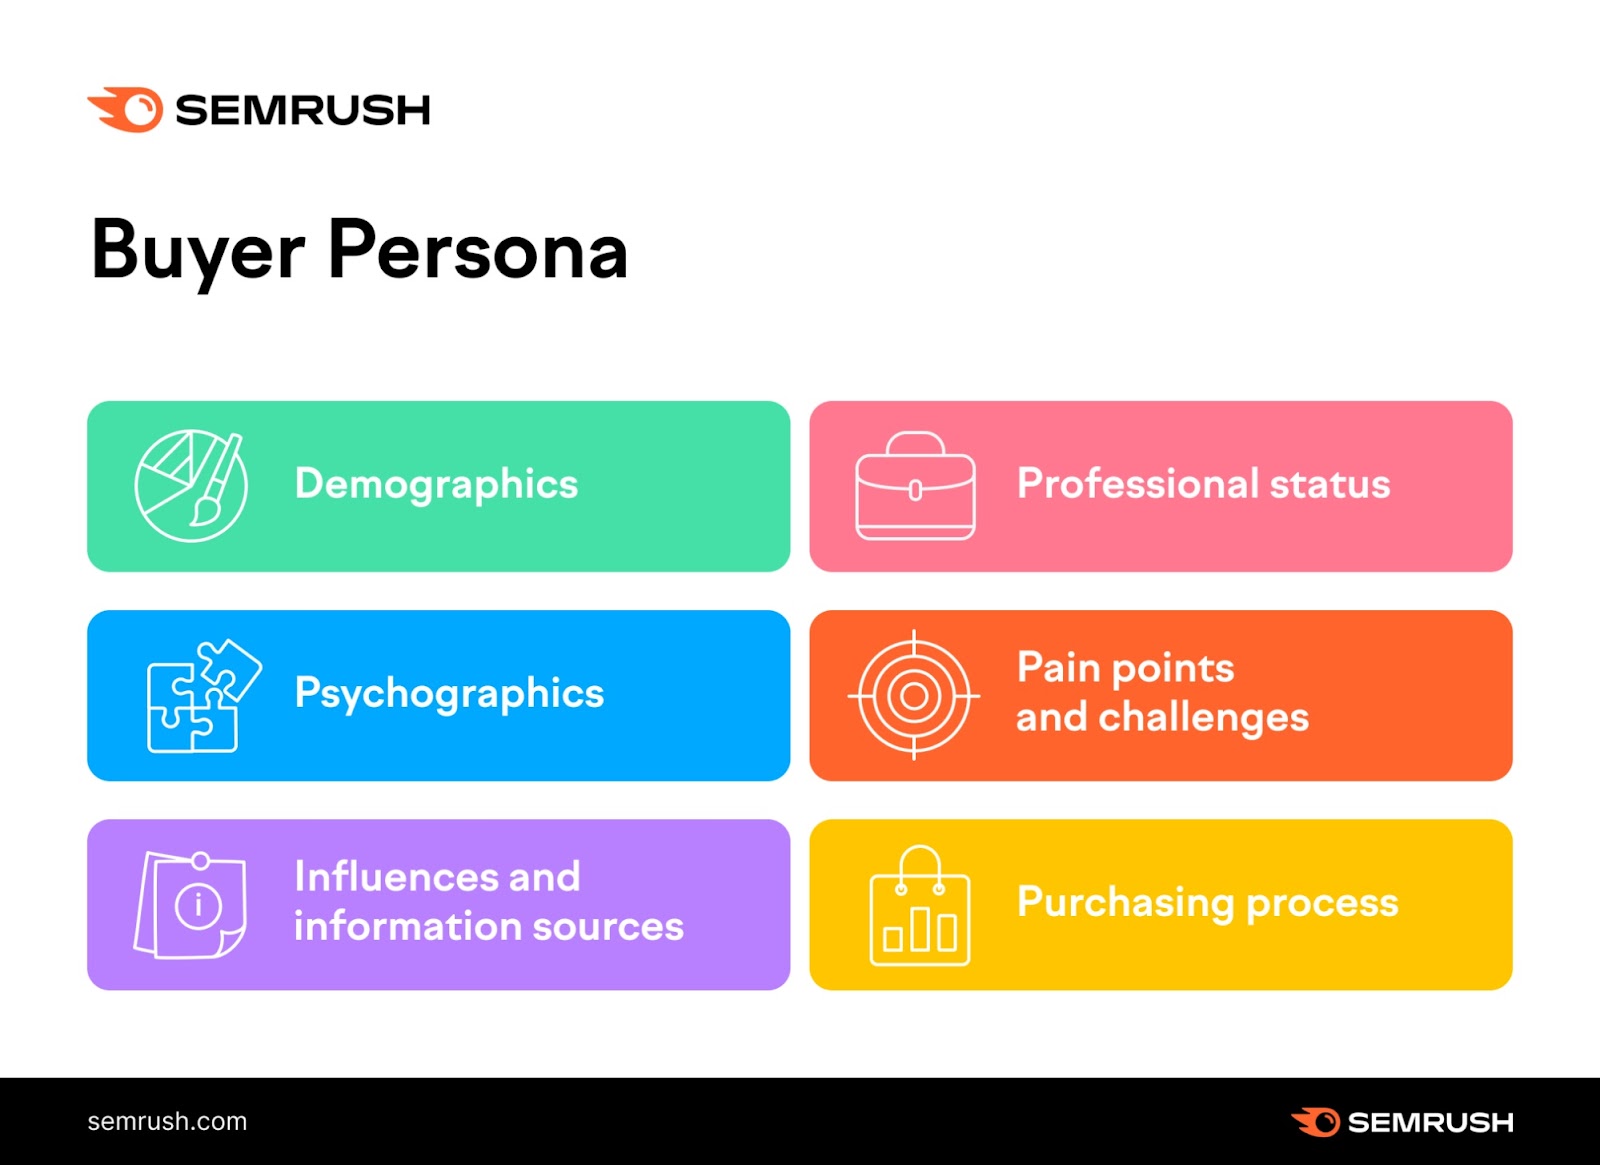 Buyer persona categories are demographics, professional status, psyc،graphics, pain points and challenges, influences and information sources, and purchasing process